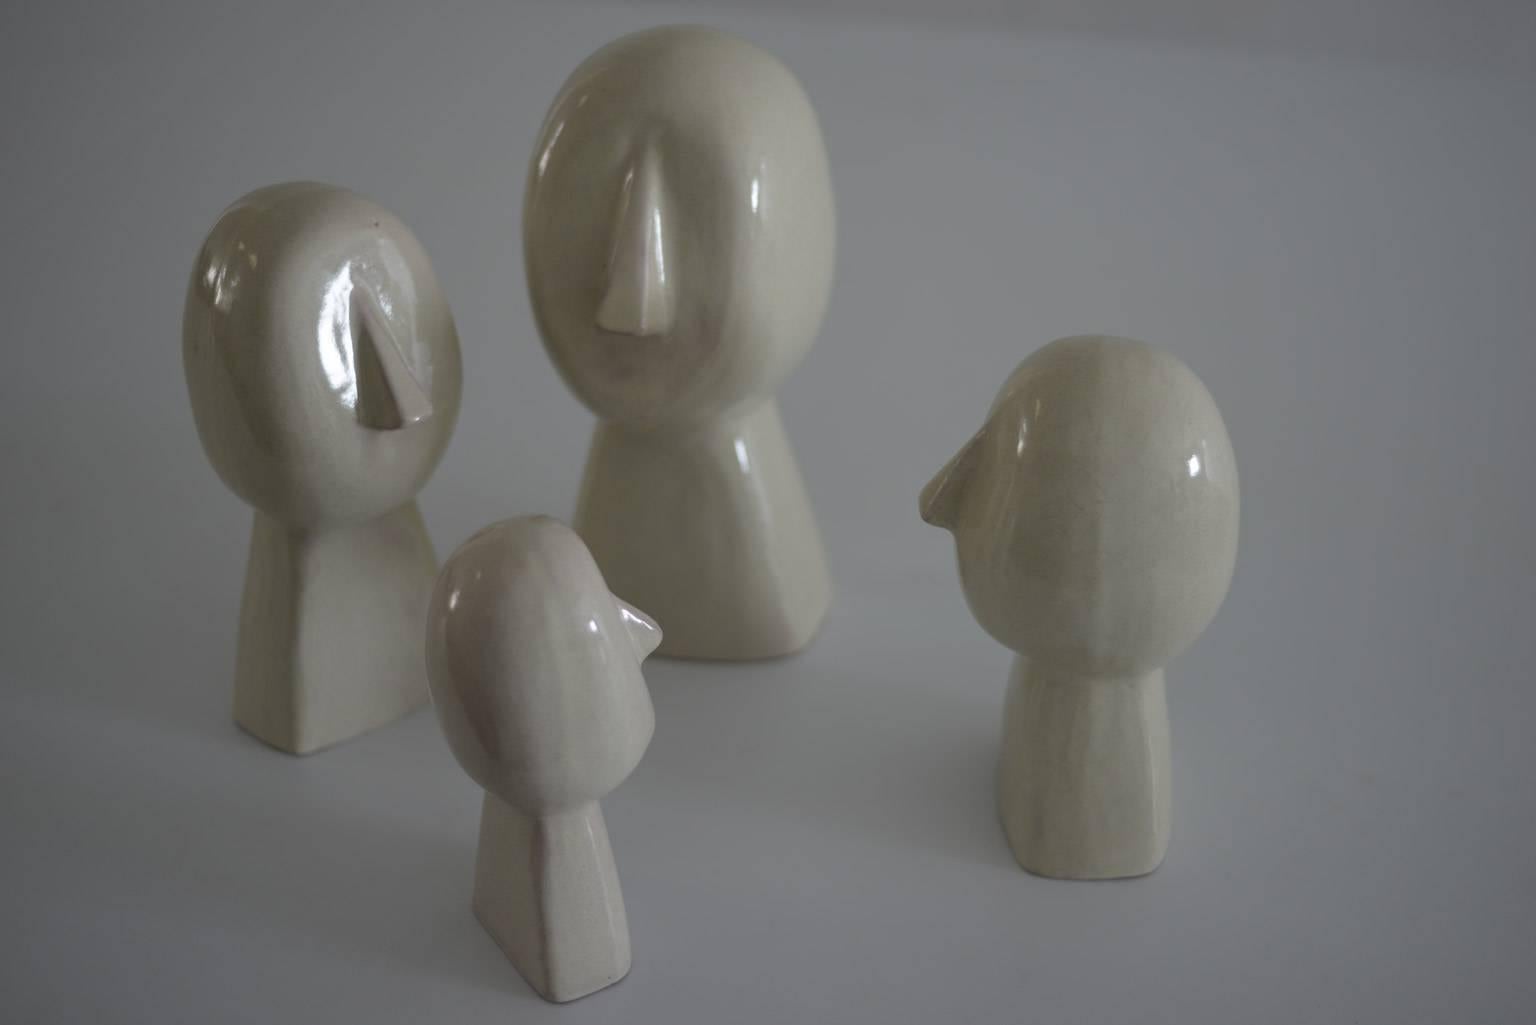 Organic Modern White Human Sculptures of Talavera “The Family” by Gerardo Chapital For Sale